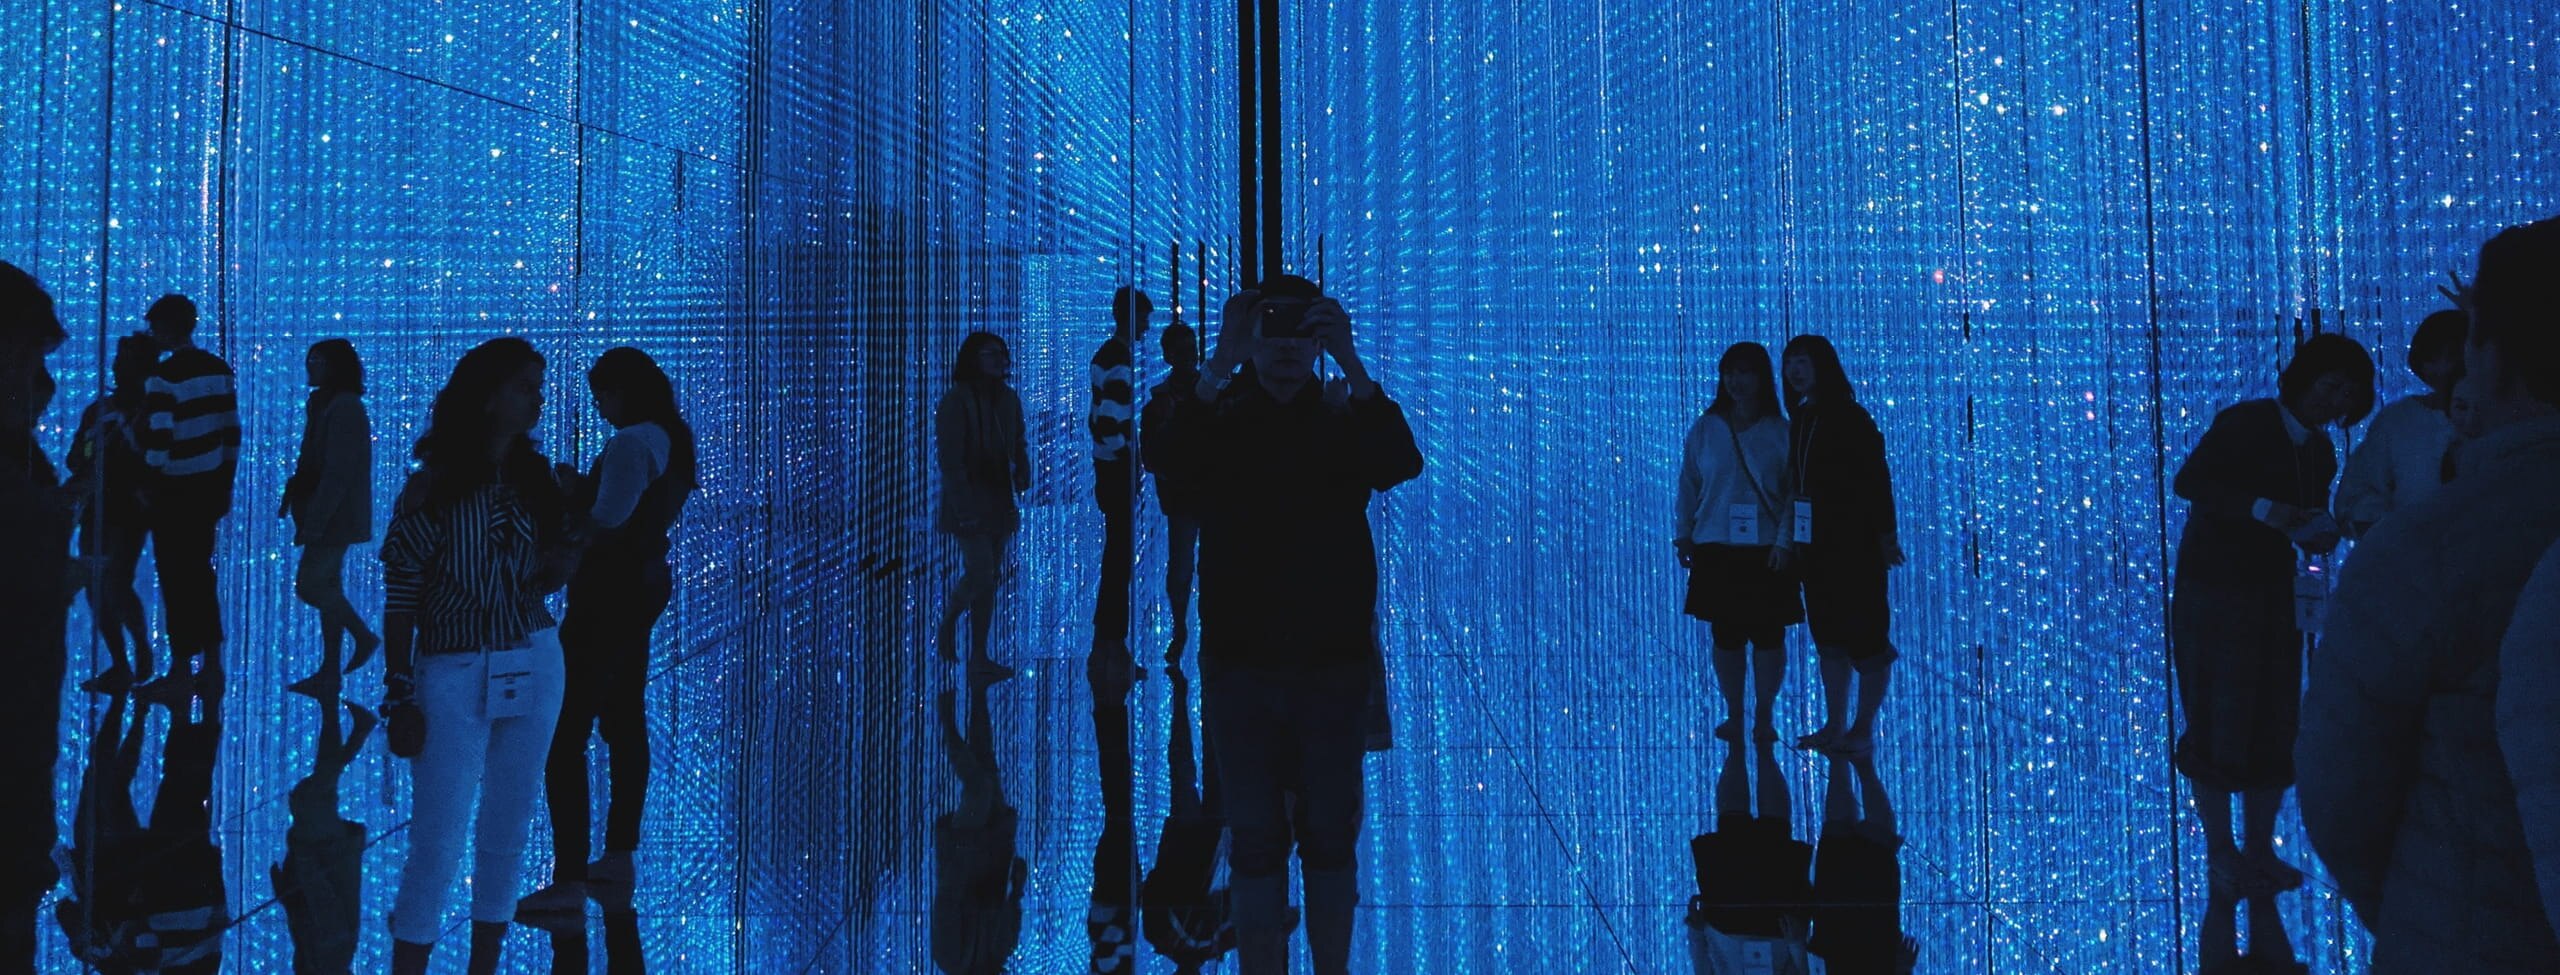 People surrounded by blue lights